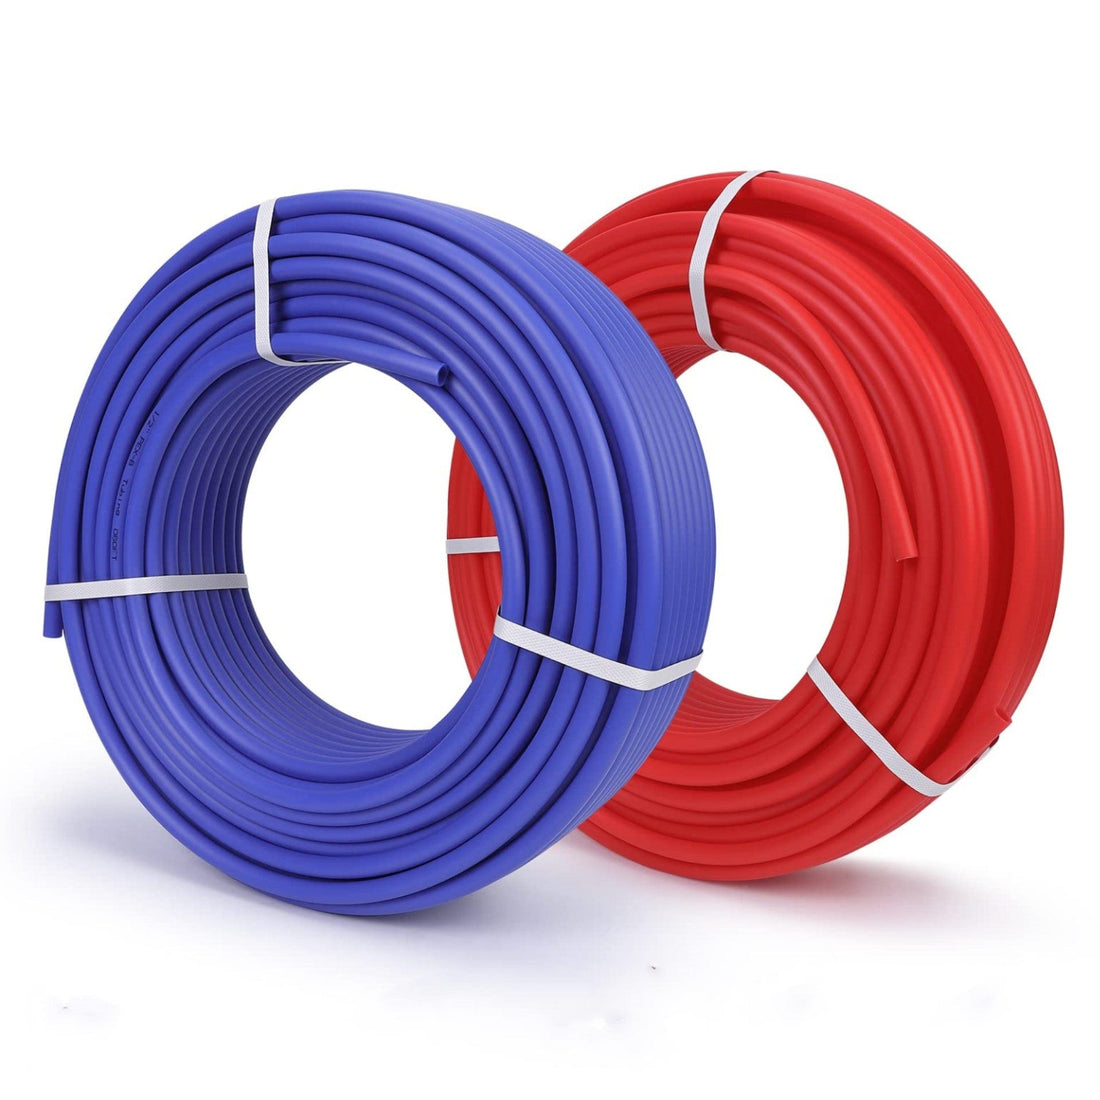 600FT Total PEX A Pipe, 1/2 Inch for Efficient Floor Heating